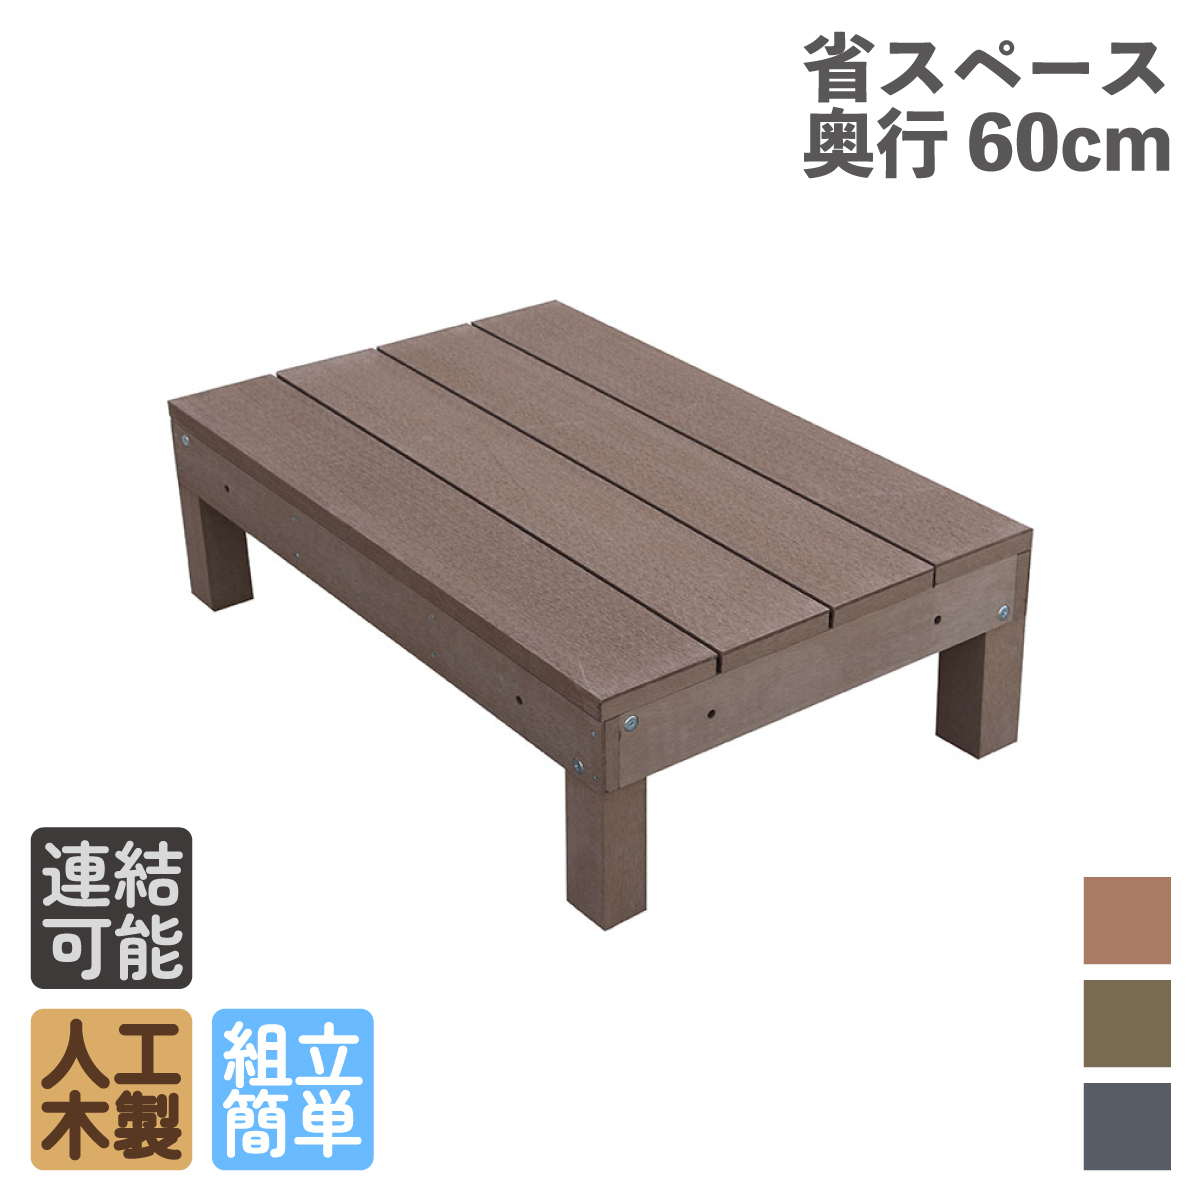  wood deck 60 series human work wooden approximately 0.54 flat rice [1 point set ] dark brown # 60-1ddb I wood deck 60 series A60D wood deck resin 